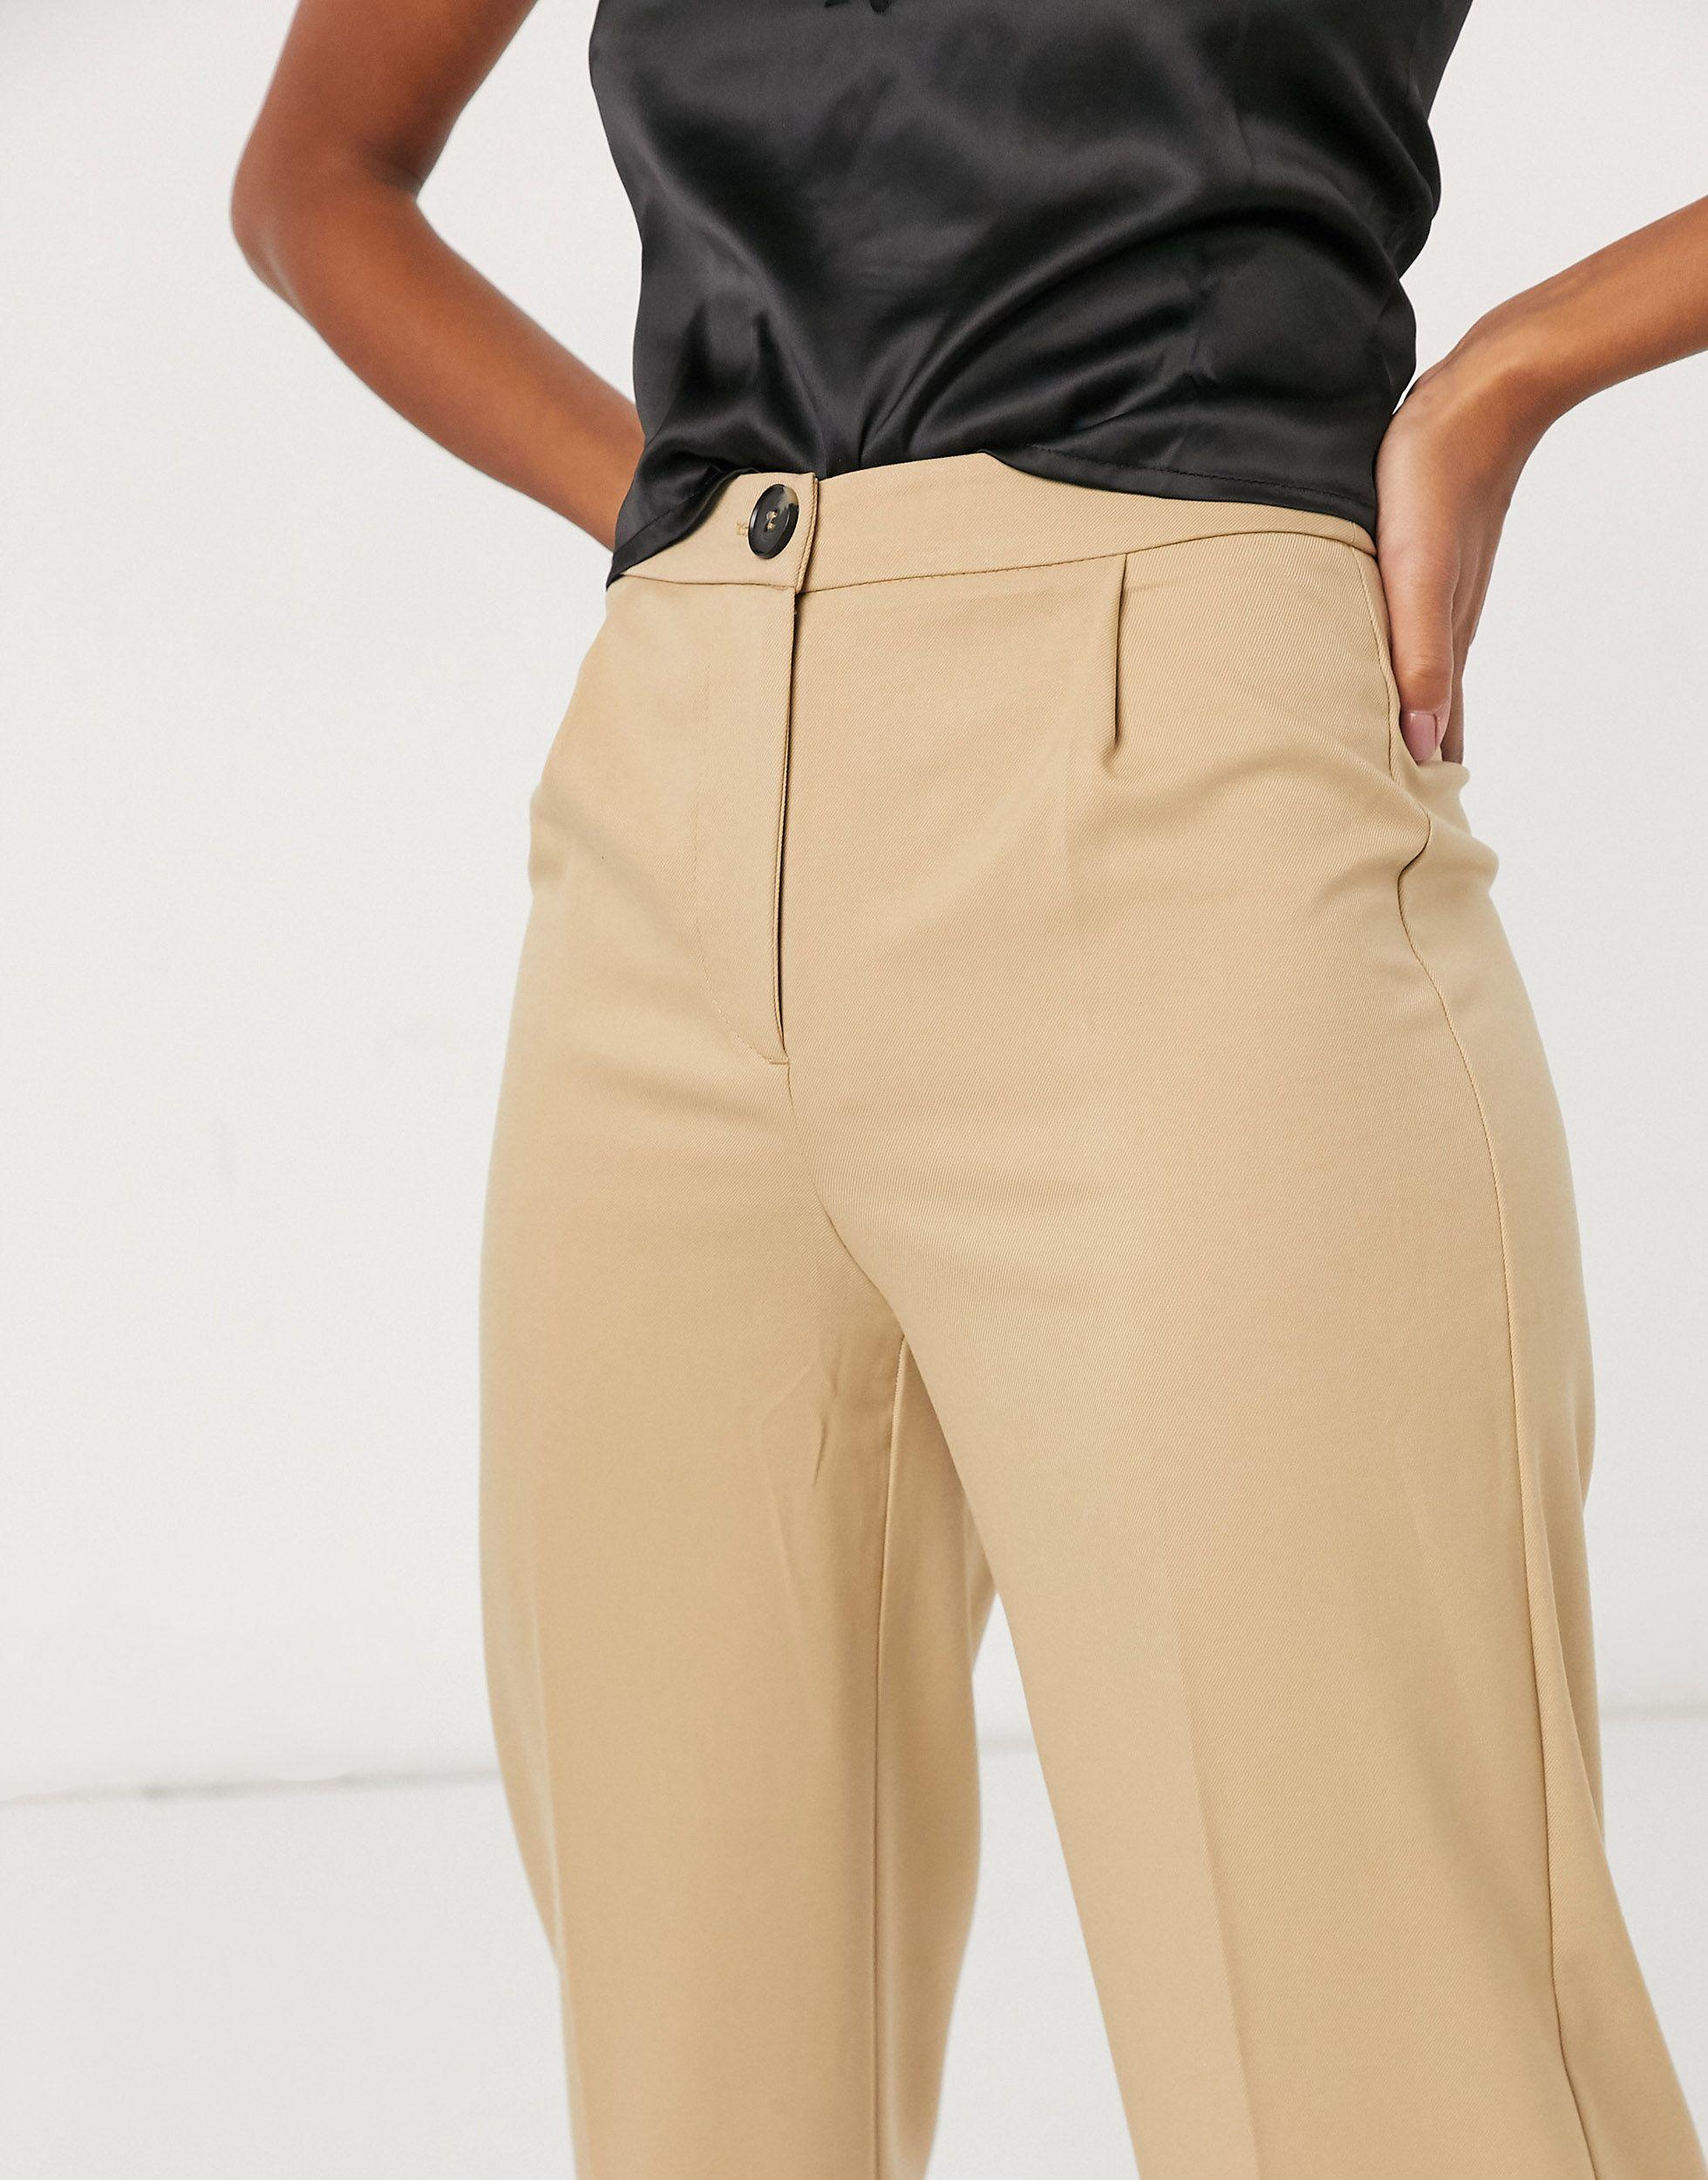 Bershka Wide Leg Relaxed Tailored Pant in Natural | Lyst